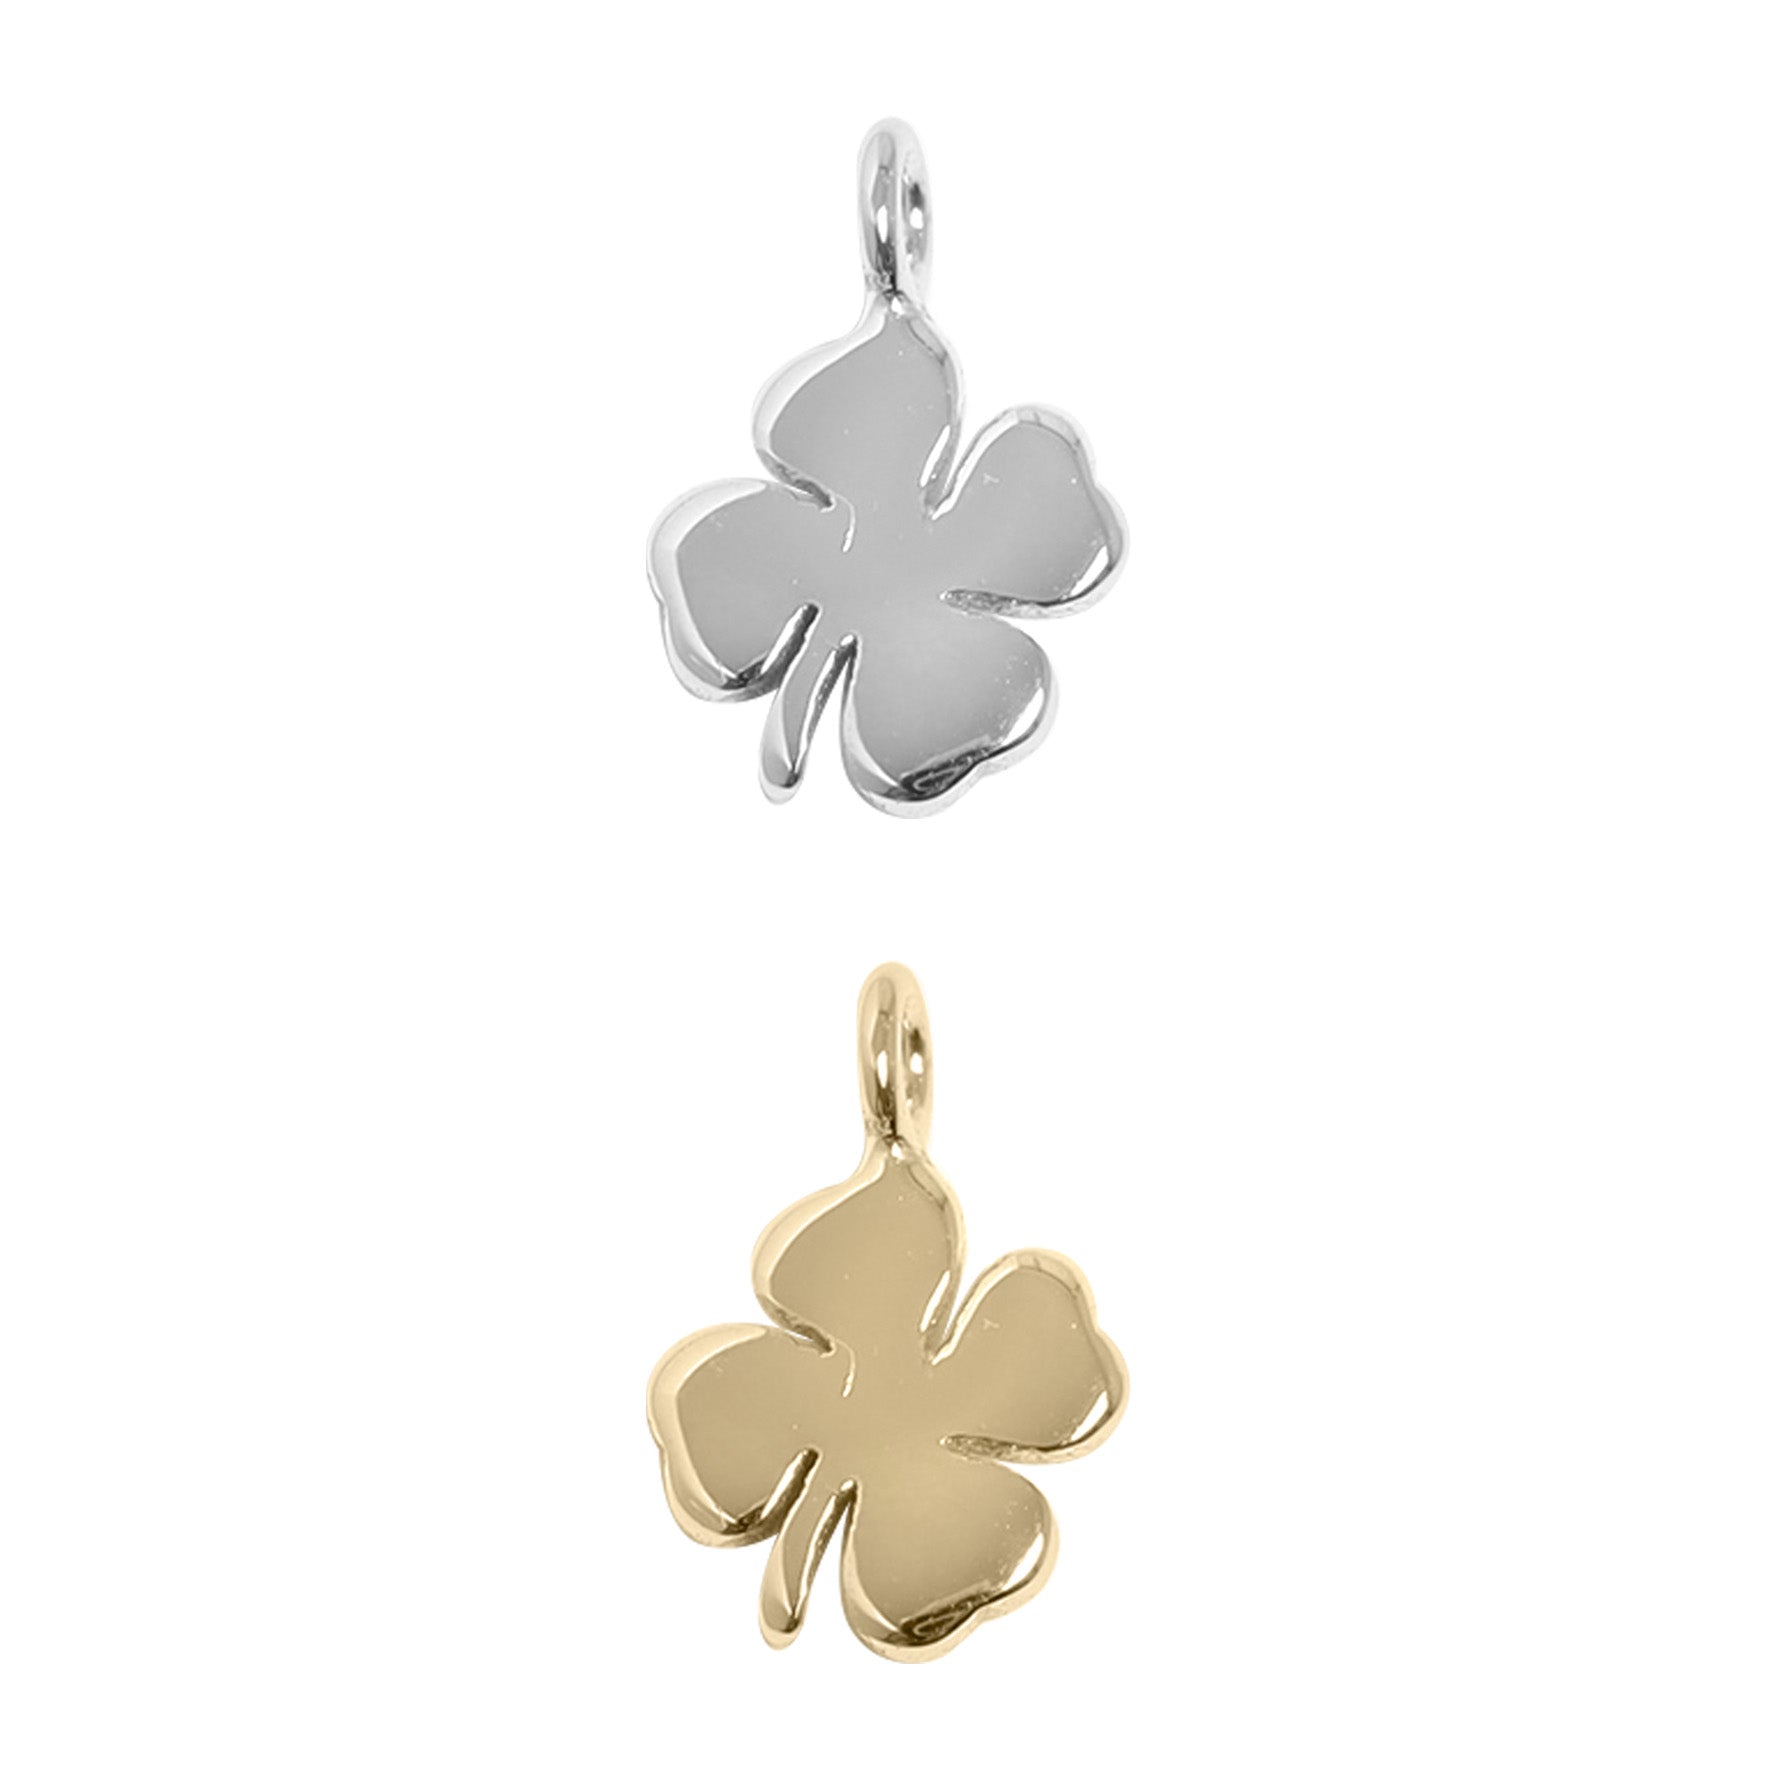 .925 Sterling Silver Four Leaf Clover Charm for Permanent Jewelry / PMJ1025